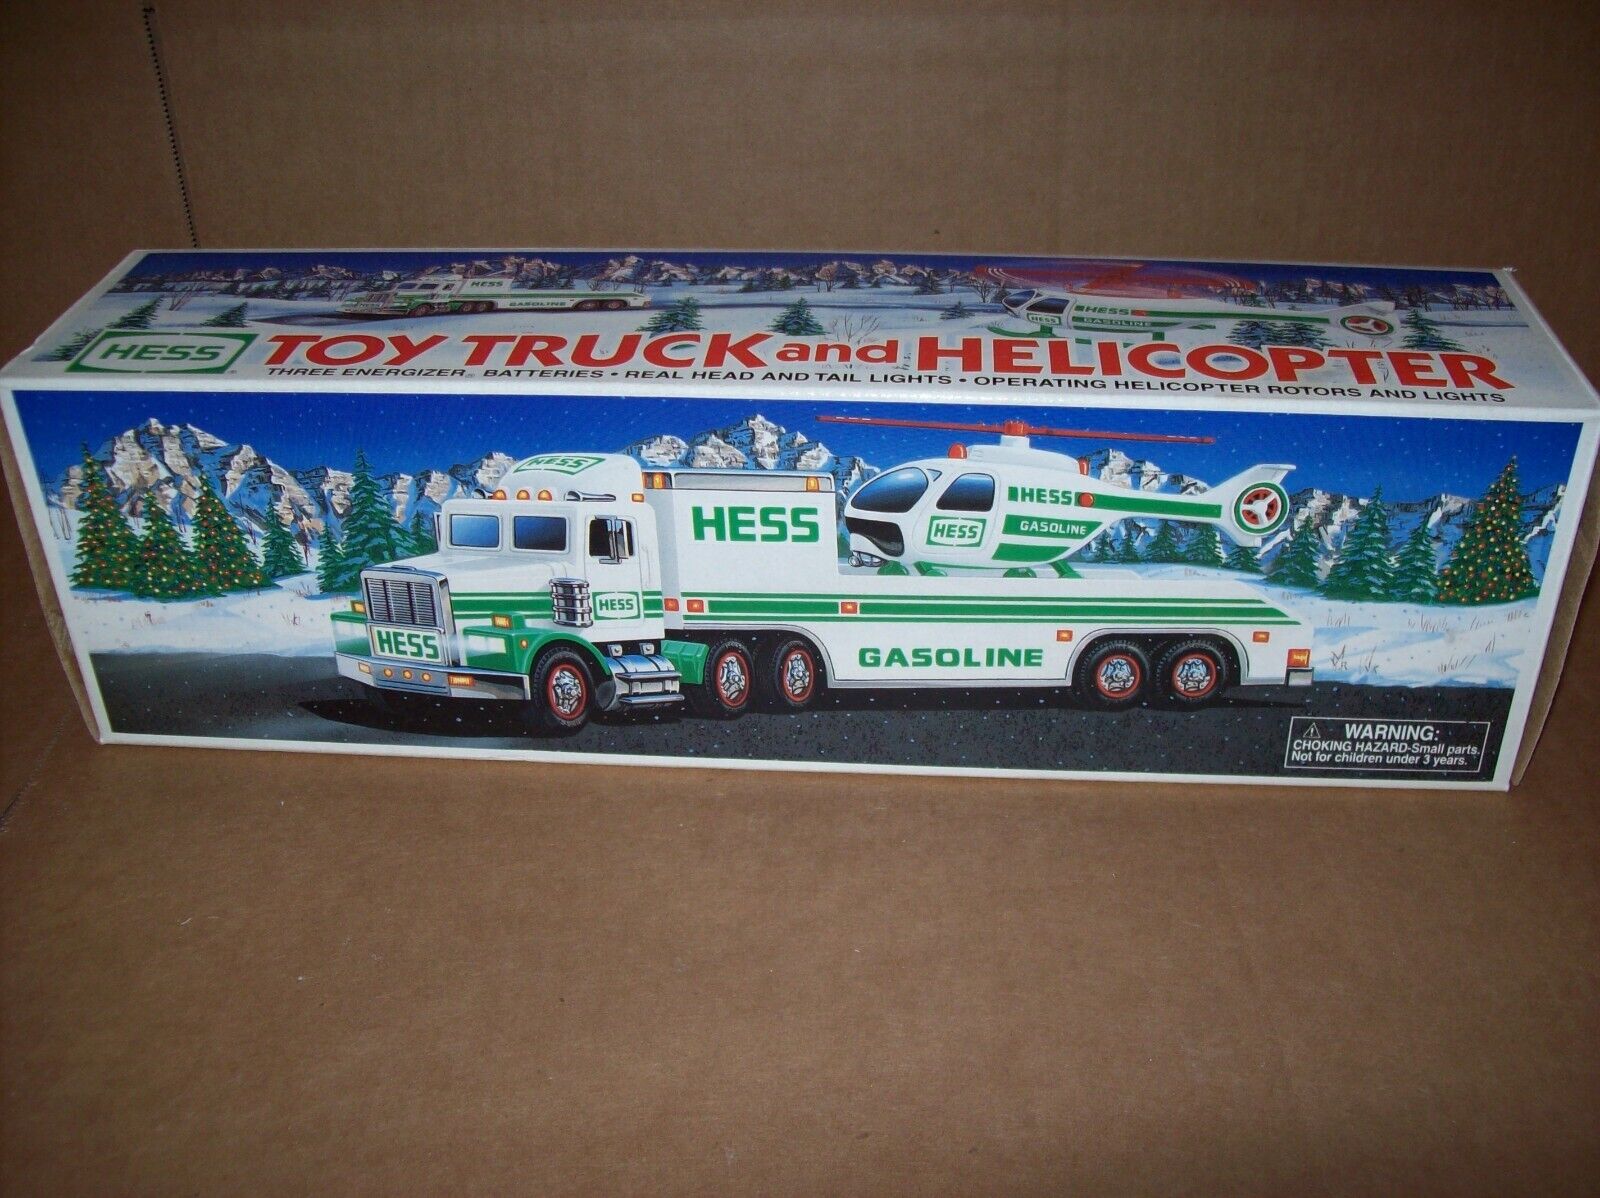 Vintage 1995 Hess Toy Truck & Helicopter New open box